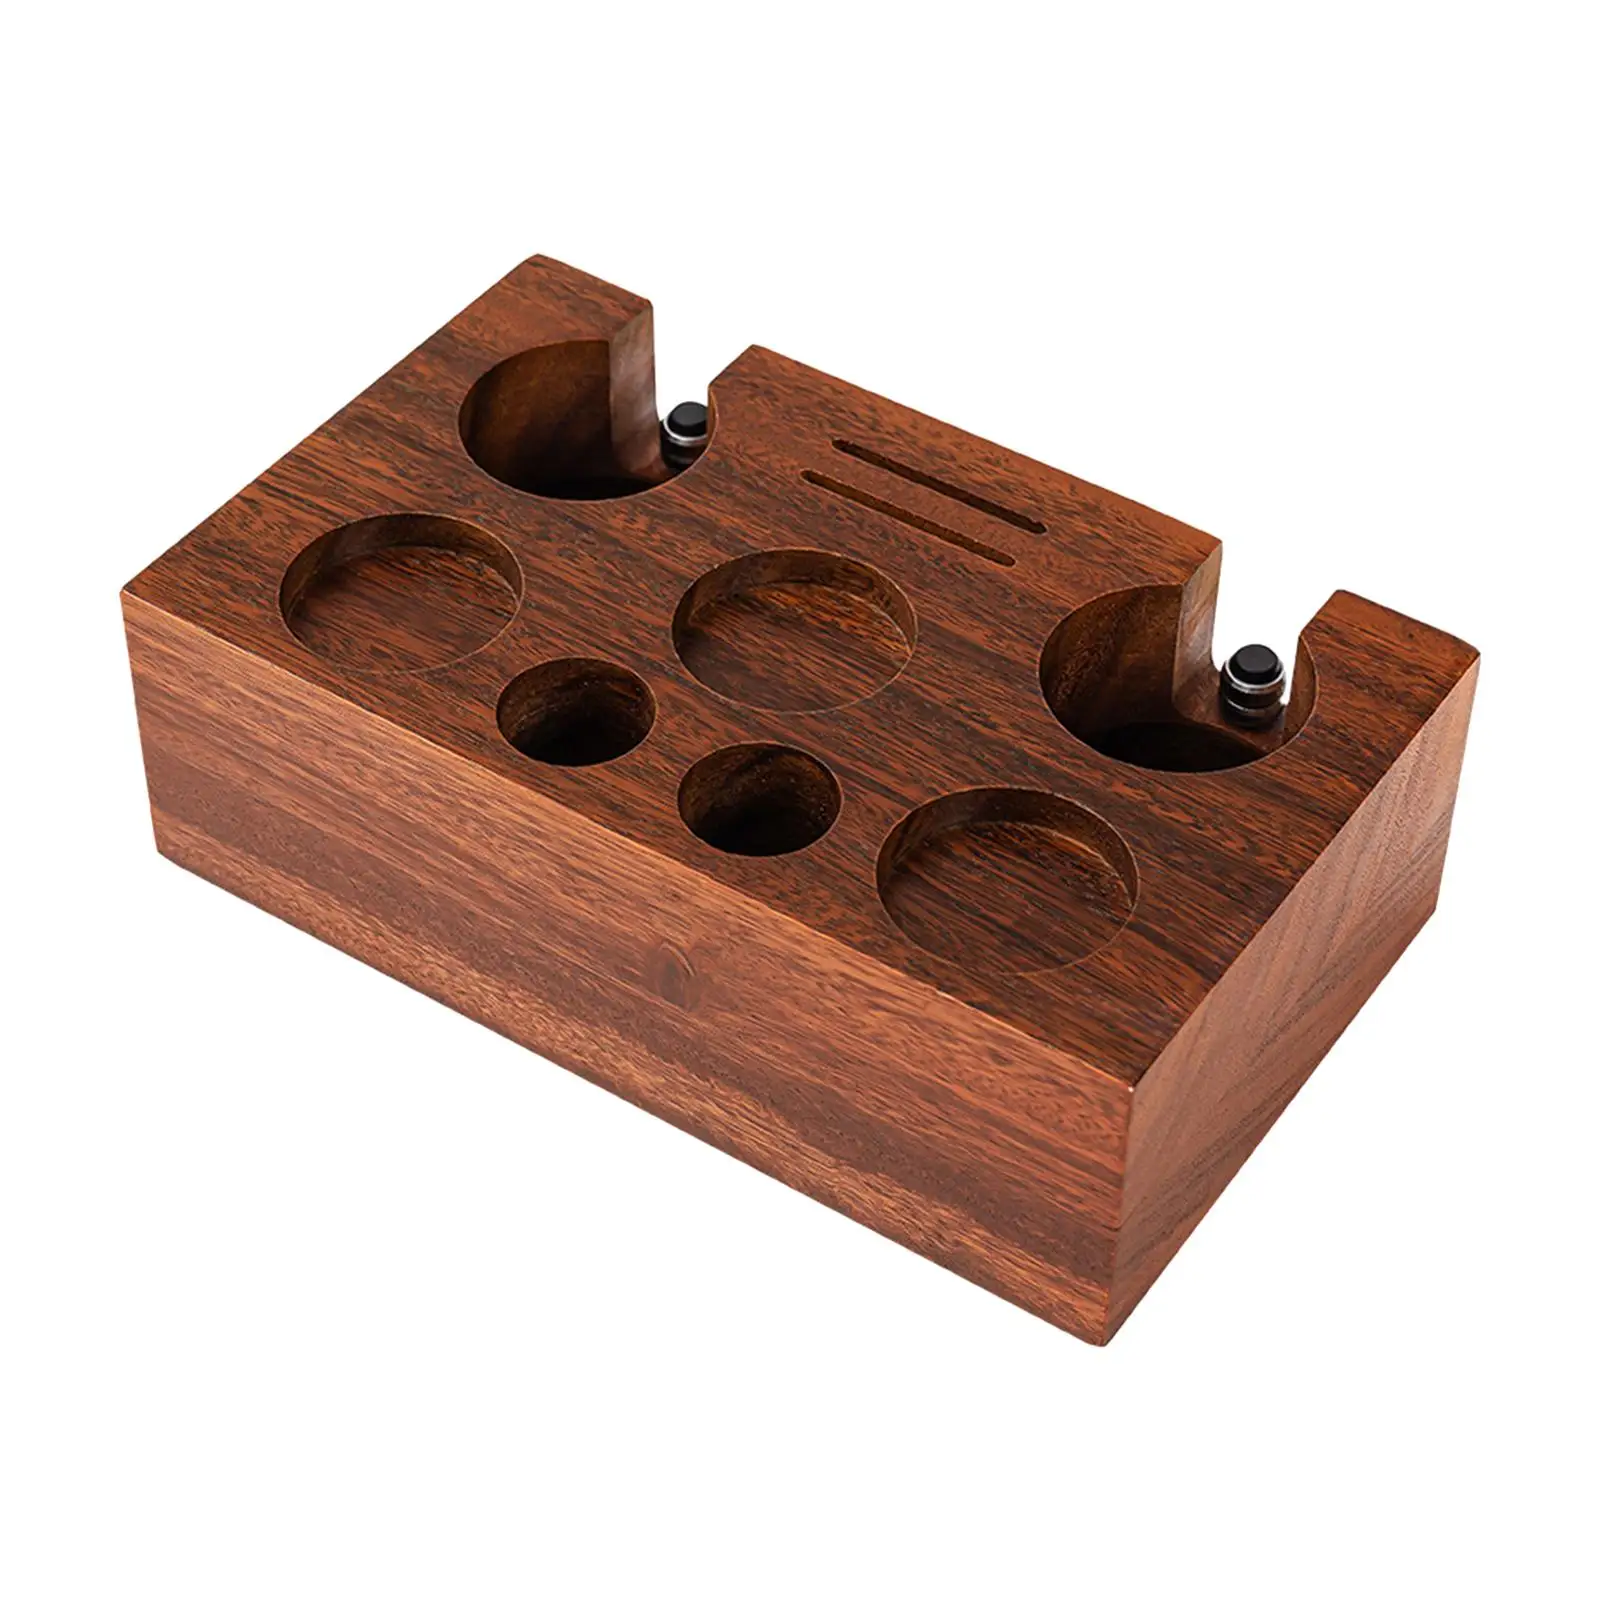 Wooden Coffee Tamper Station Base Tamper Stand and Portafilter Holder for Coffee Bar Home Worktop Shop Barista Tool